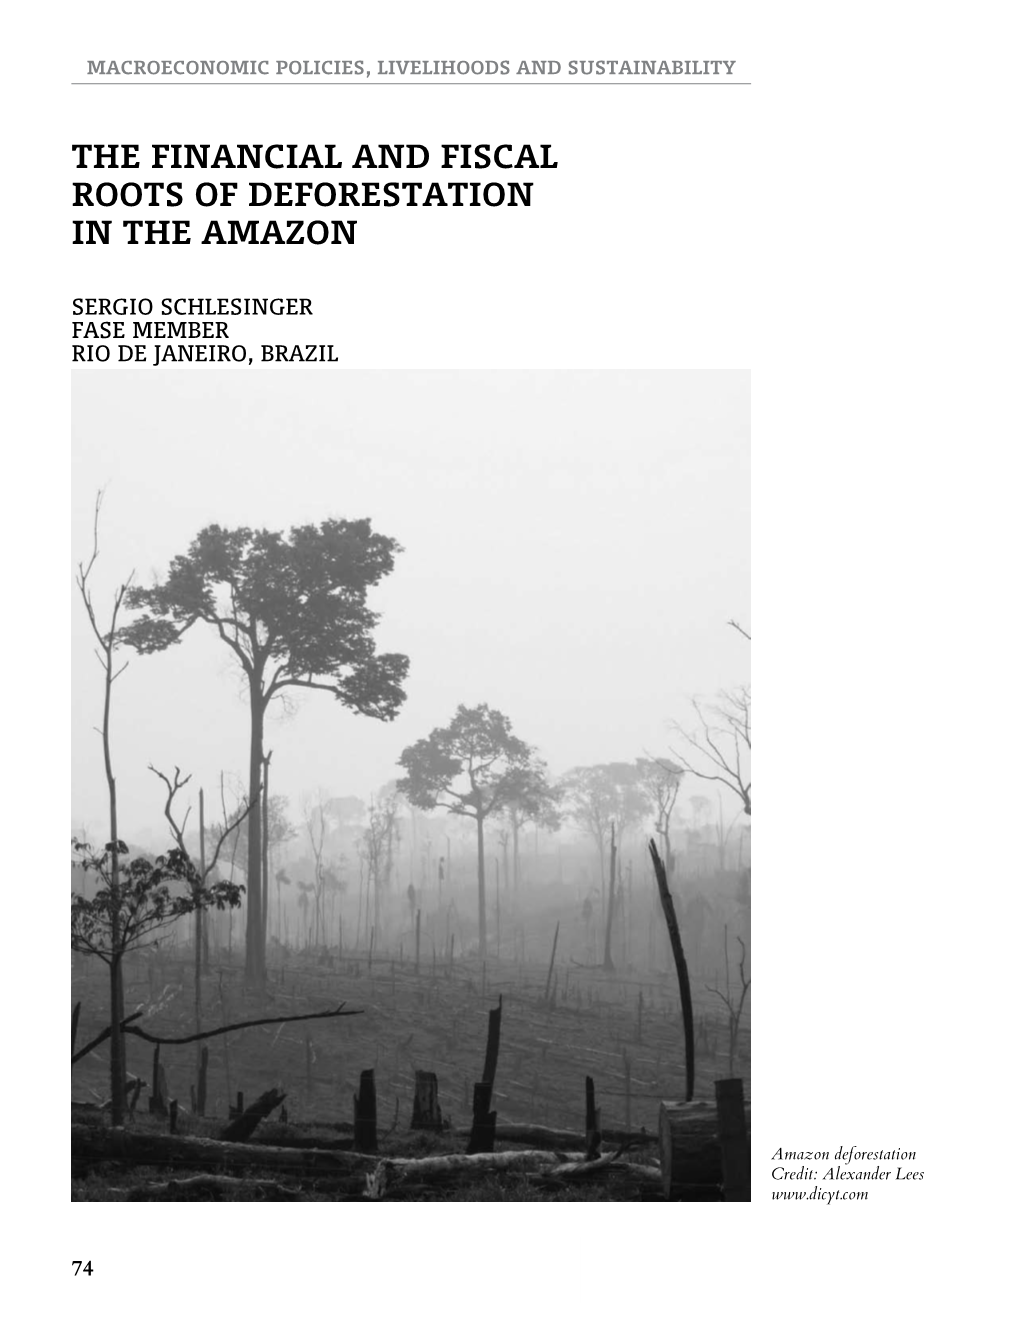 The Financial and Fiscal Roots of Deforestation in the Amazon